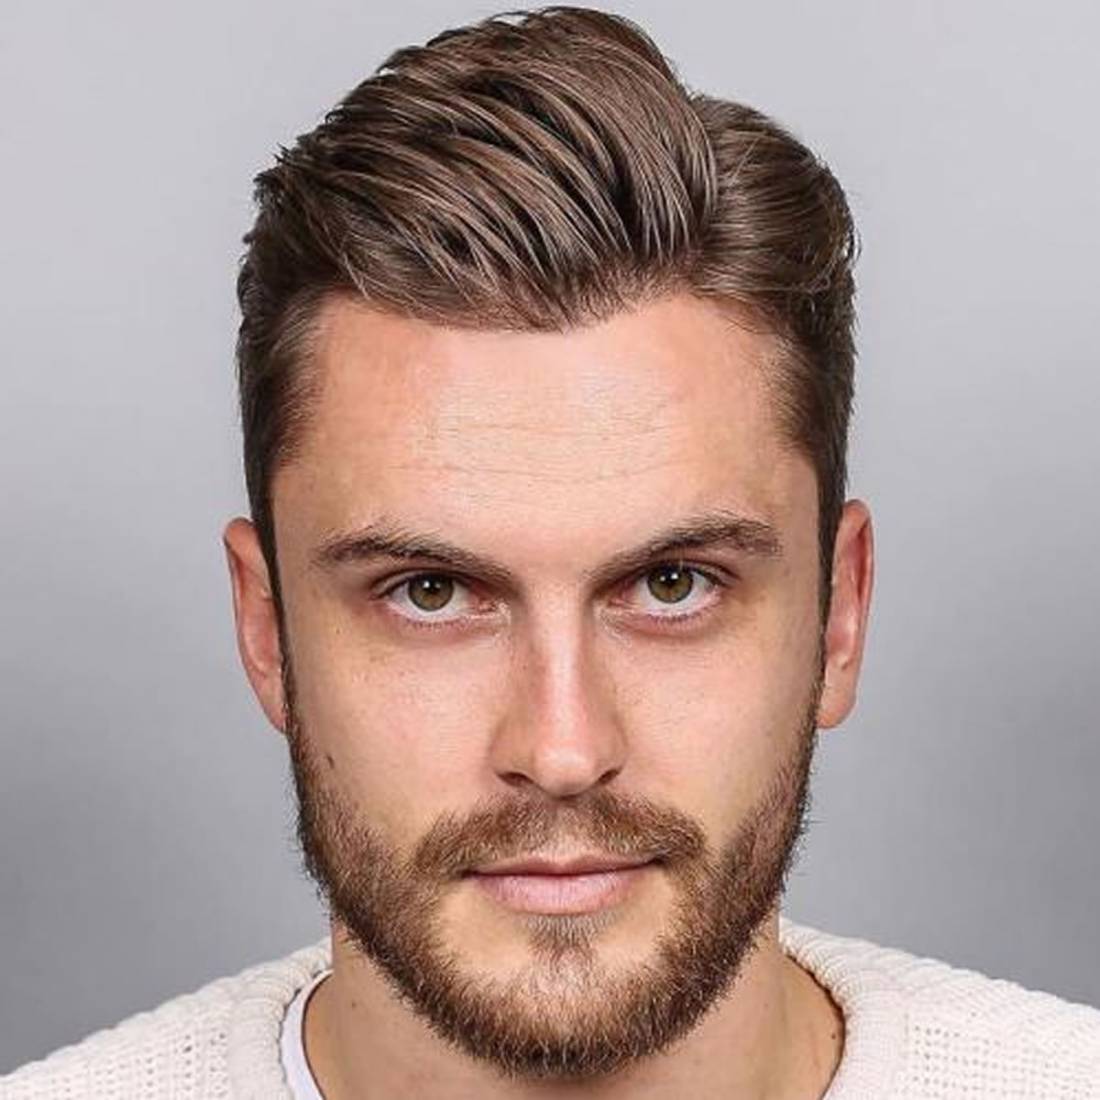 Stylish & Simple Short Hairstyles For Men